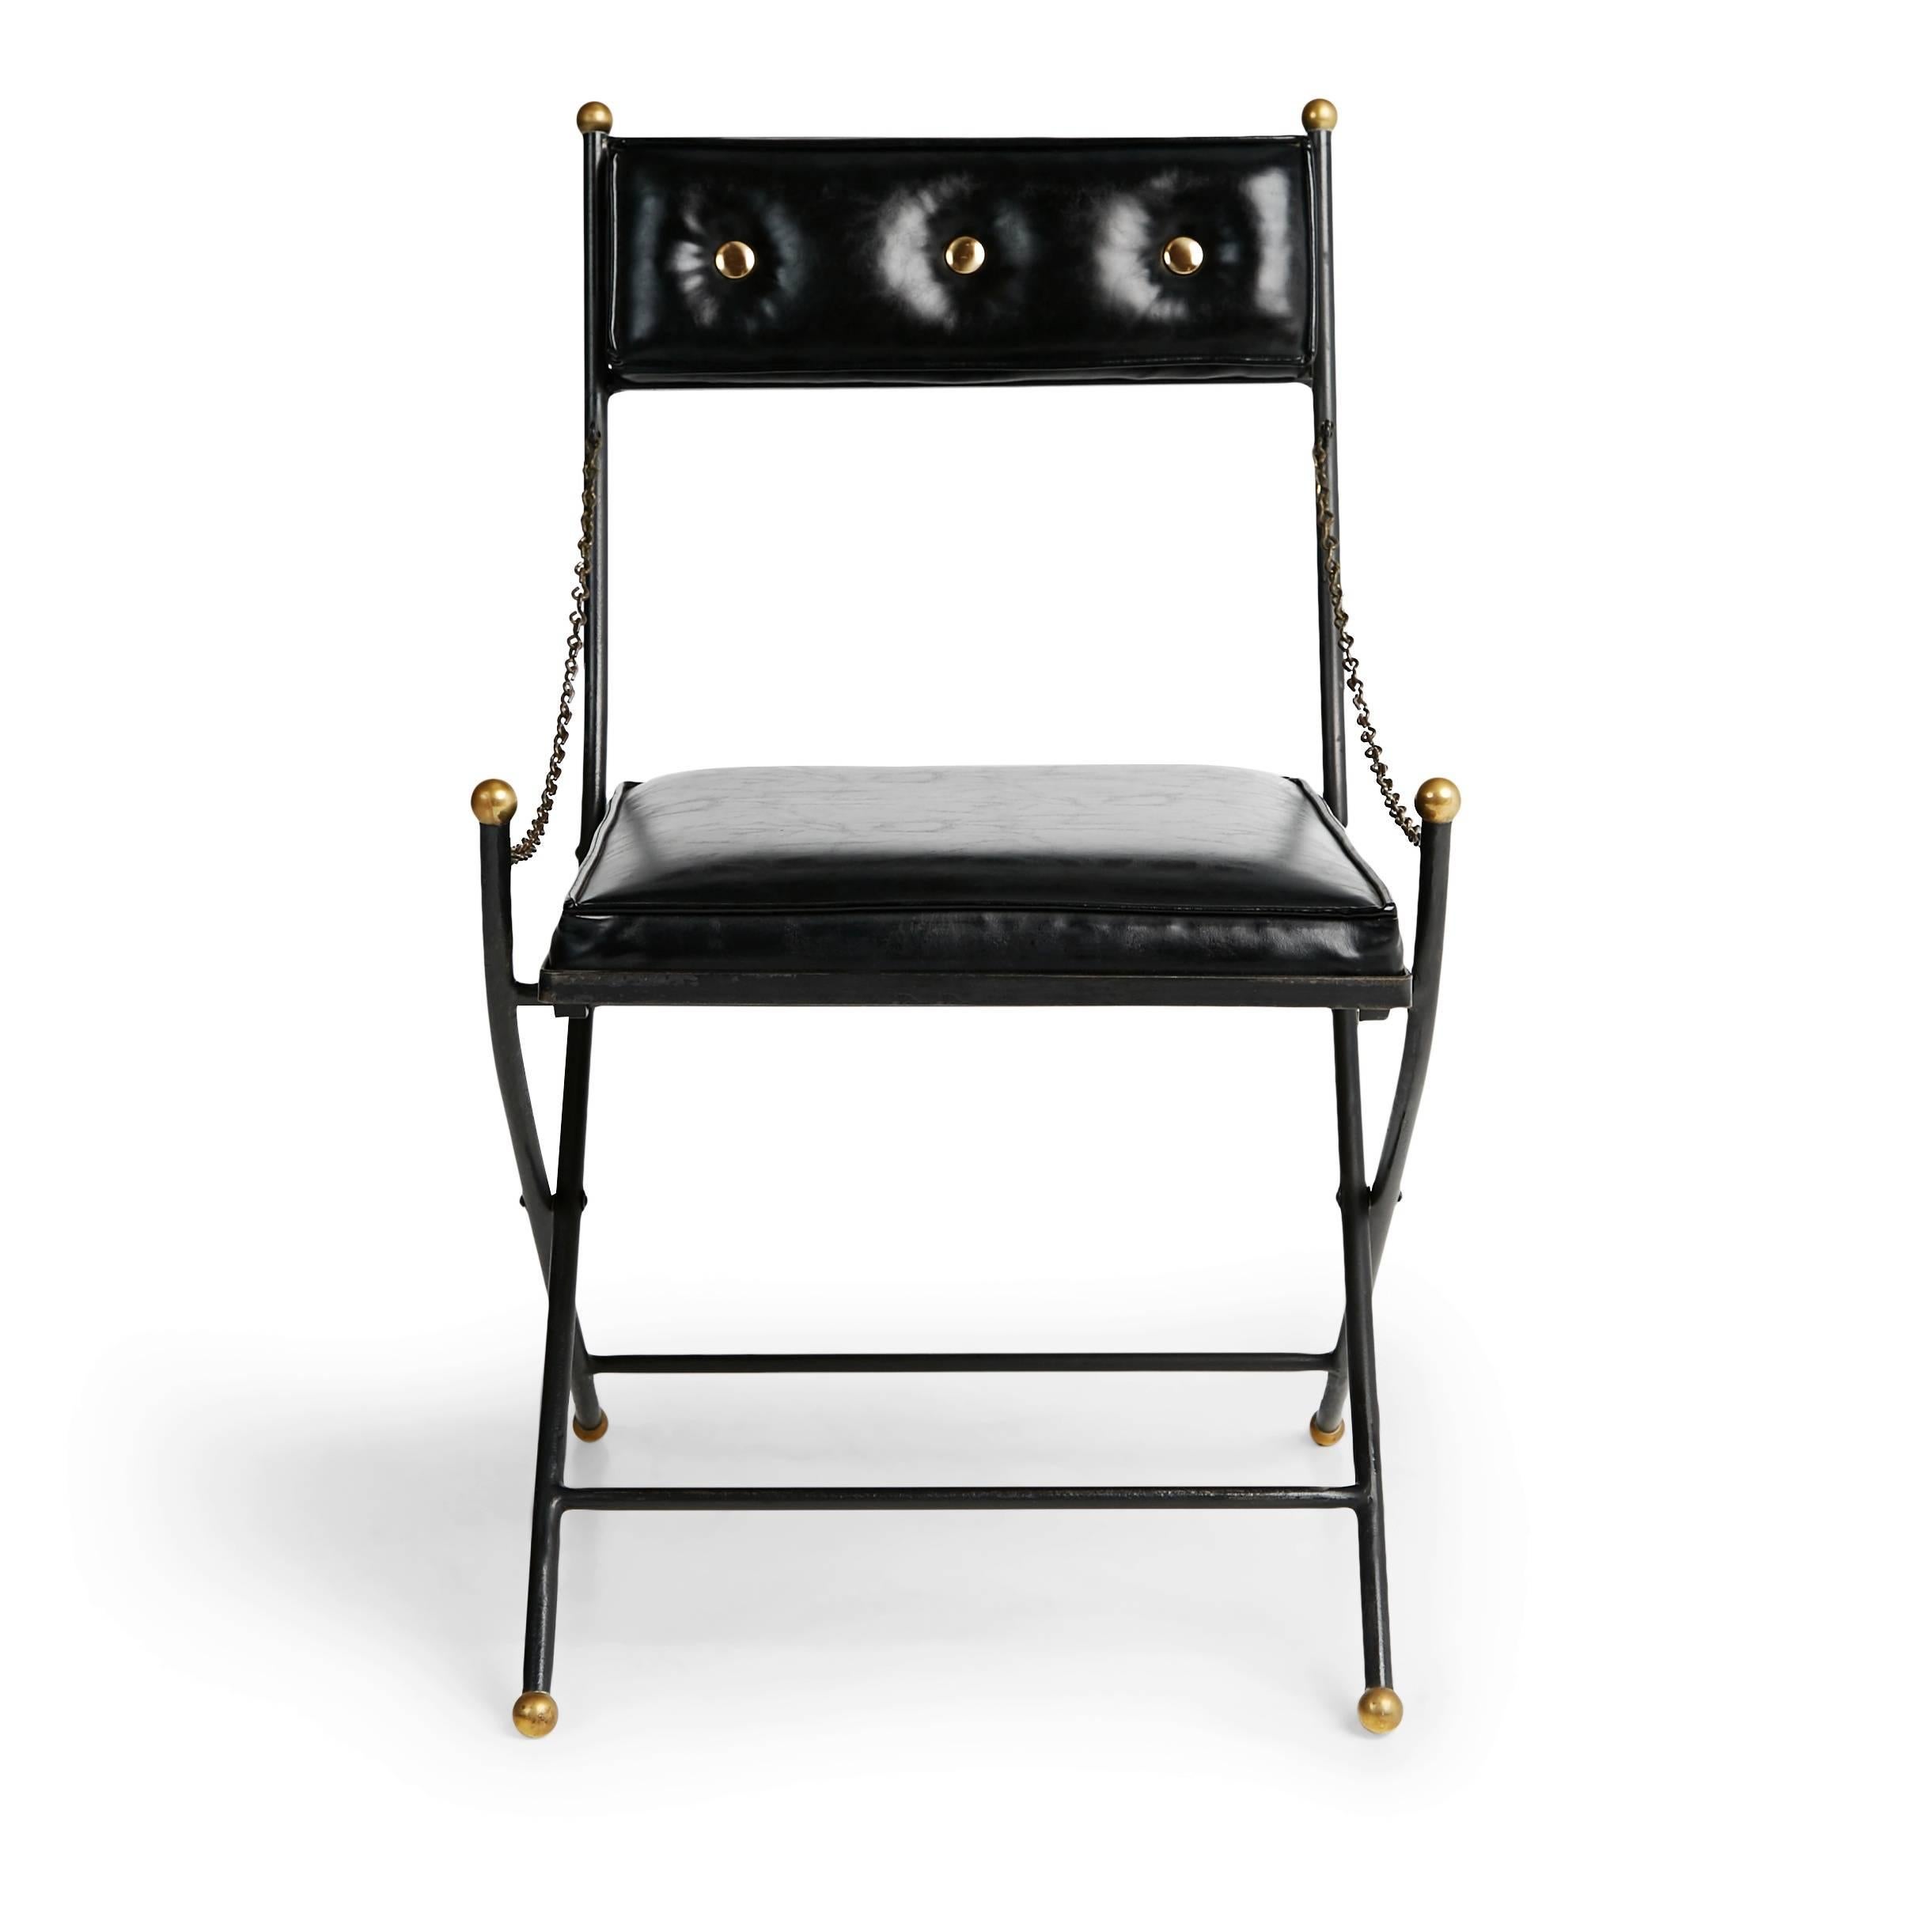 Set of eight Campaign folding chairs in the style of Maison Jansen and Tommi Parzinger. This elegant Mid-Century Modern set comprises of four red and four black folding chairs upholstered in faux leather. They feature brass metal embellishments on